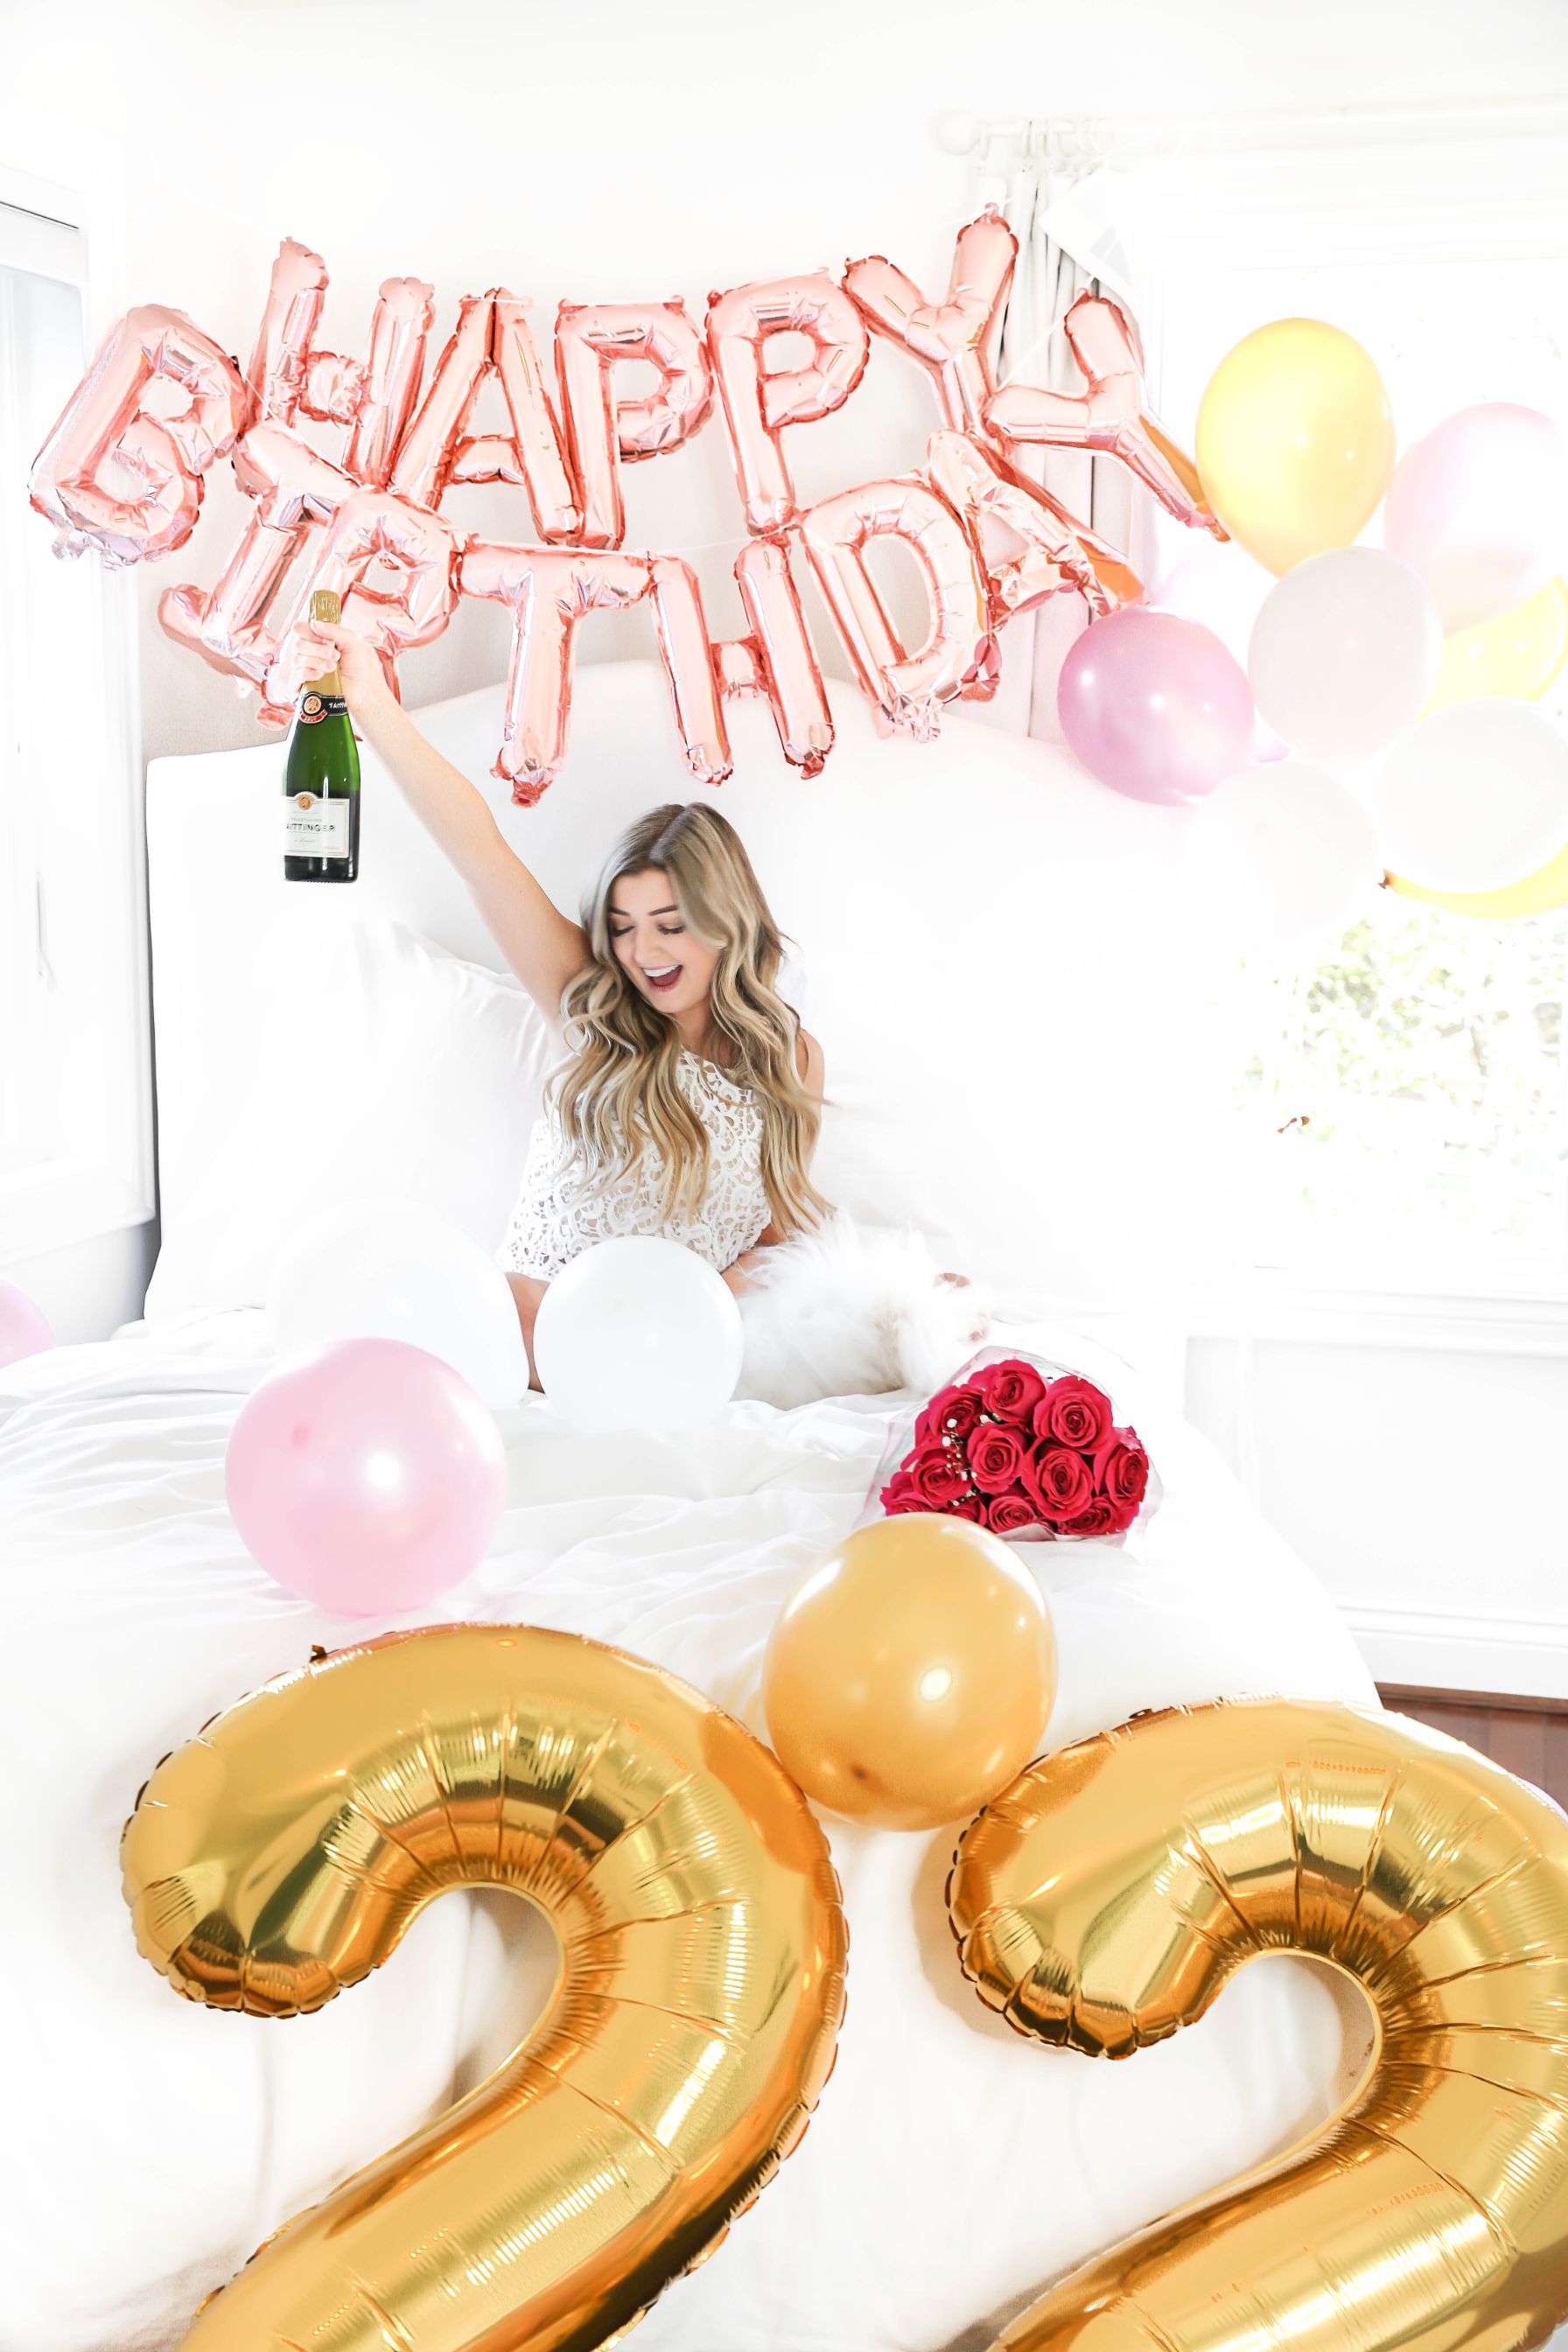 Happy birthday balloons photoshoot in bed with happy birthday blow ups and champagne! Details on fashion blog daily dose of charm by lauren lindmark